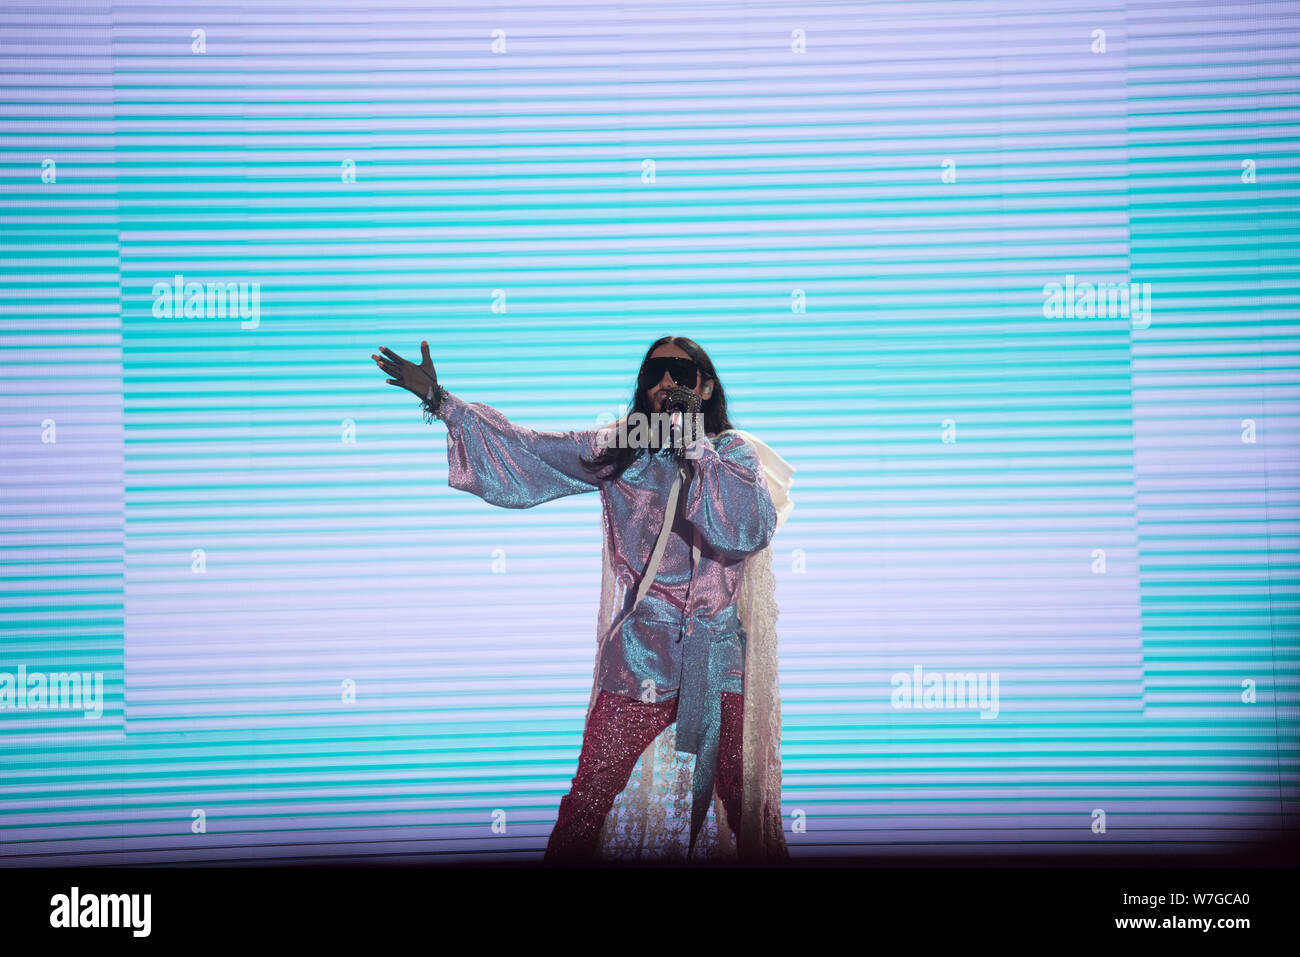 BONTIDA, ROMANIA - JULY 21, 2019: Lead vocalist Jared Leto from Thirty Seconds to Mars rock band performing live at Electric Castle festival Stock Photo